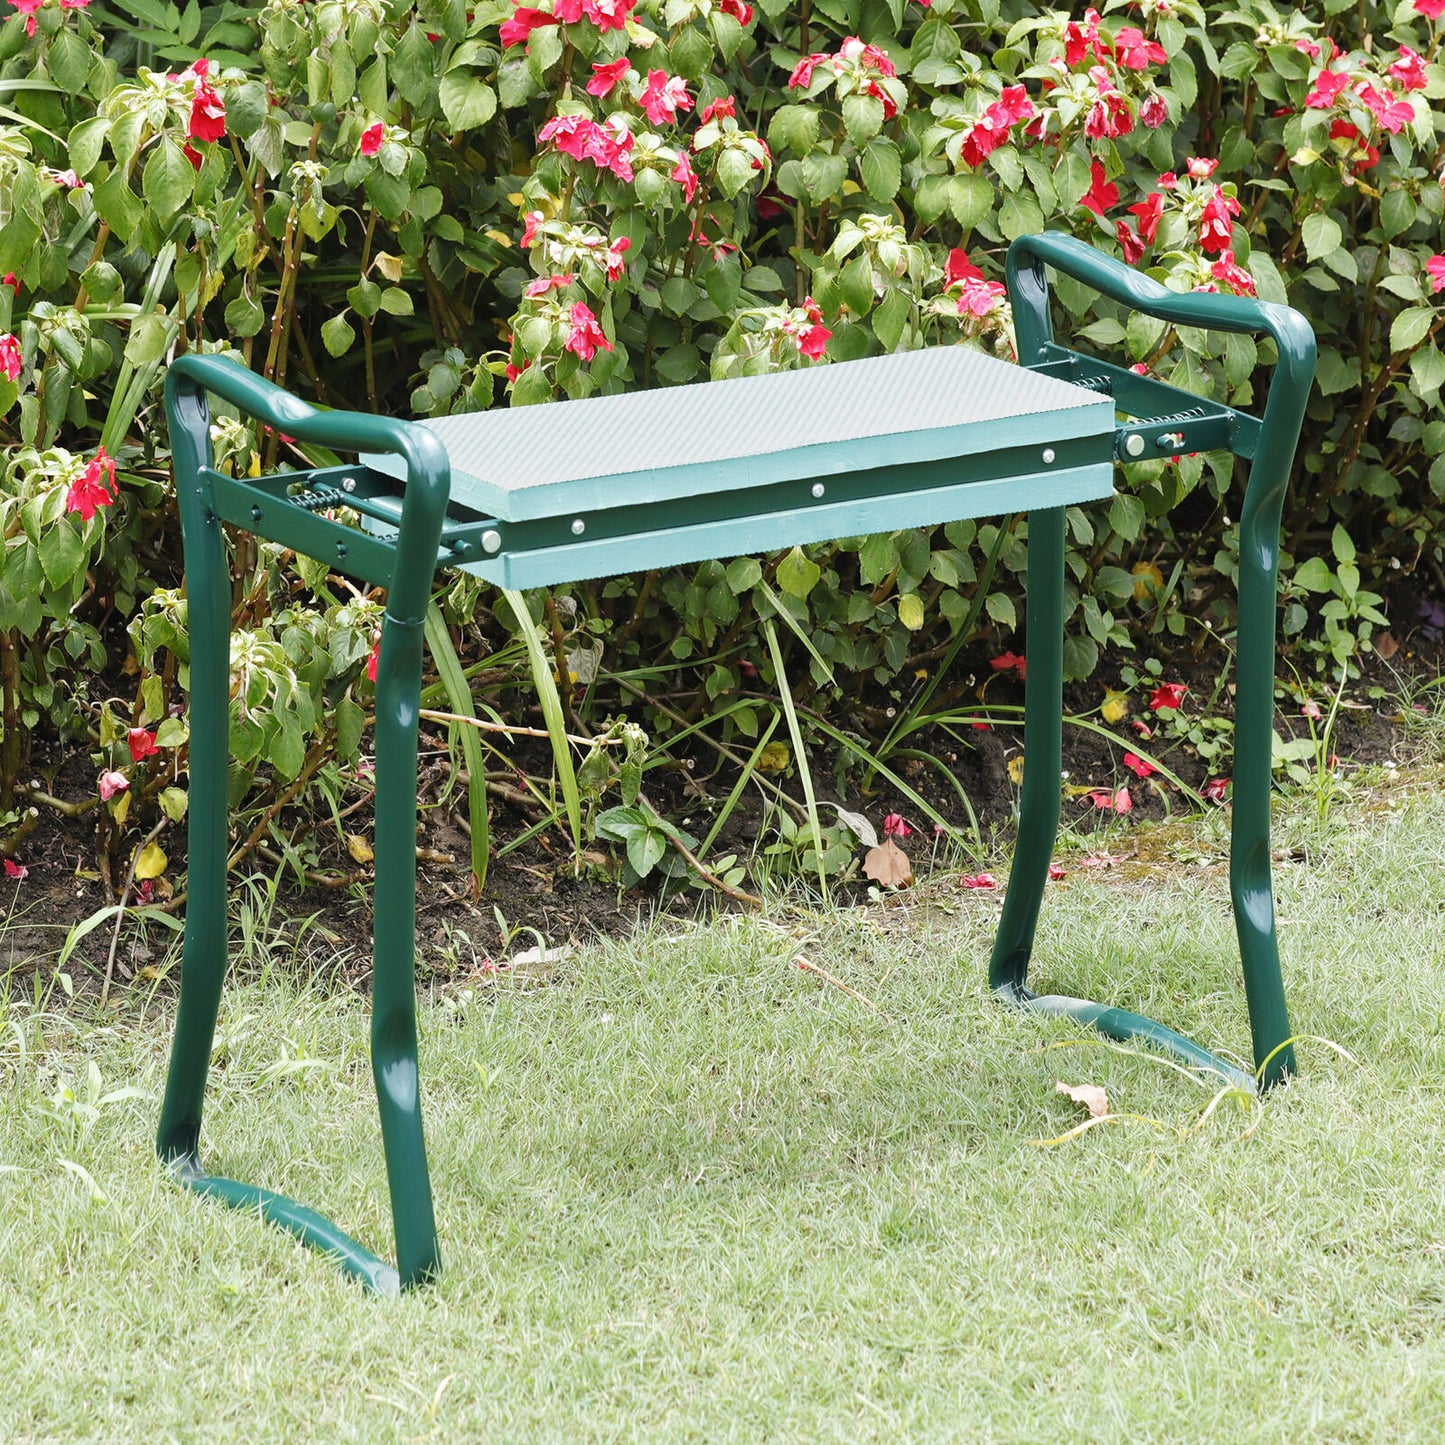 Foldable Garden Kneeler Bench Stool Soft Cushion Seat Pad Kneeling  w Tool Pouch